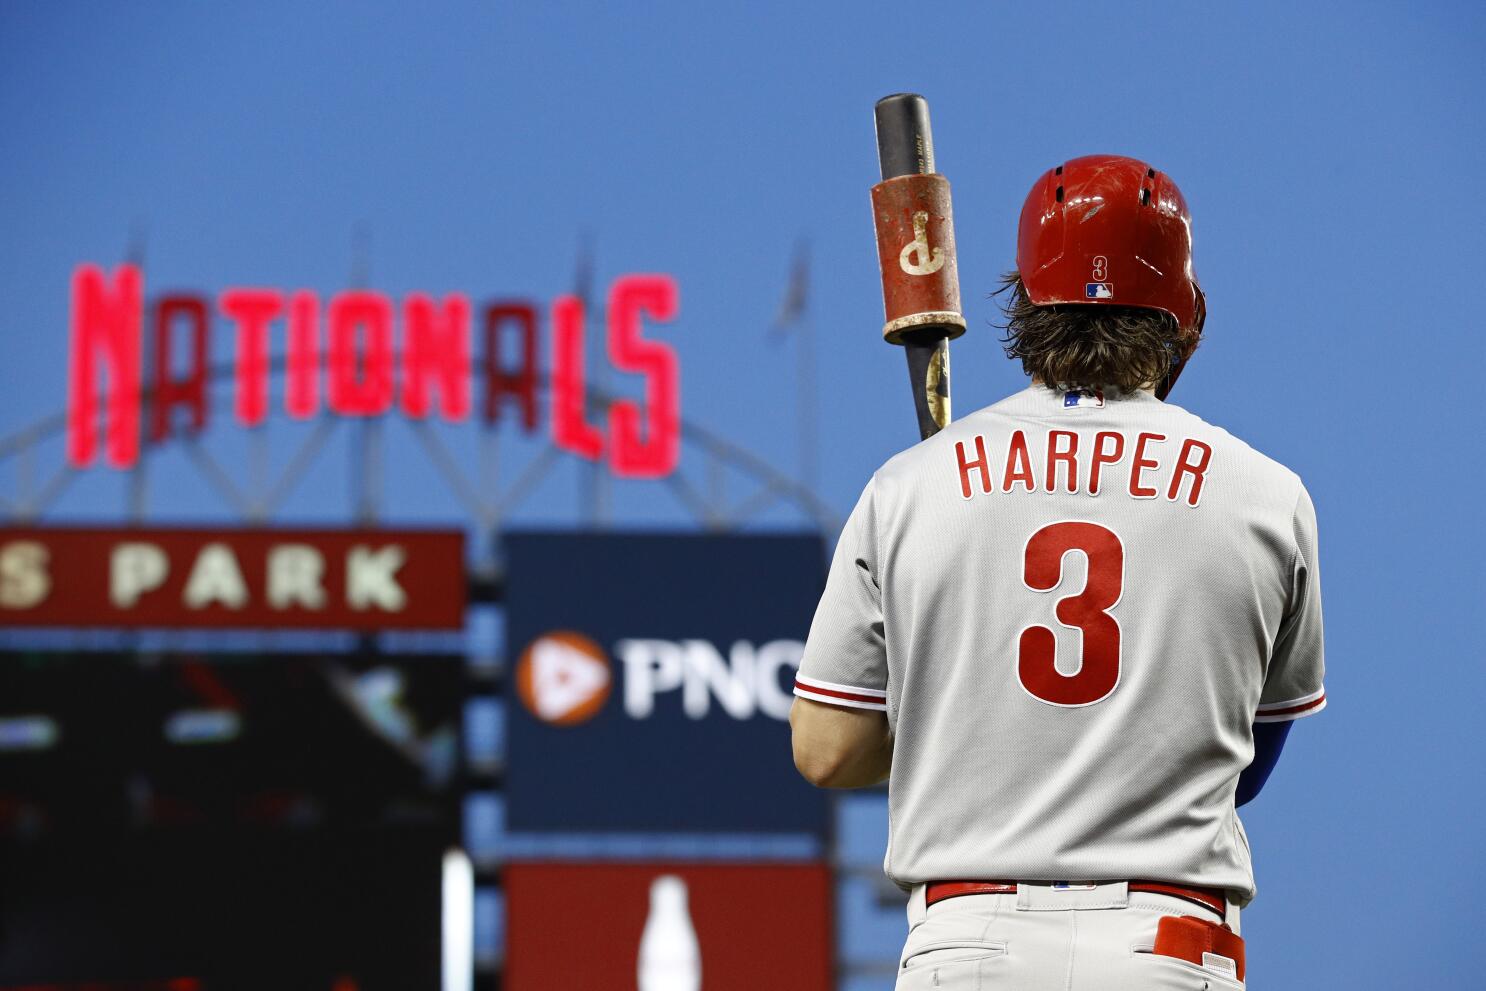 Fan's old Bryce Harper Nationals' jersey is undefeated